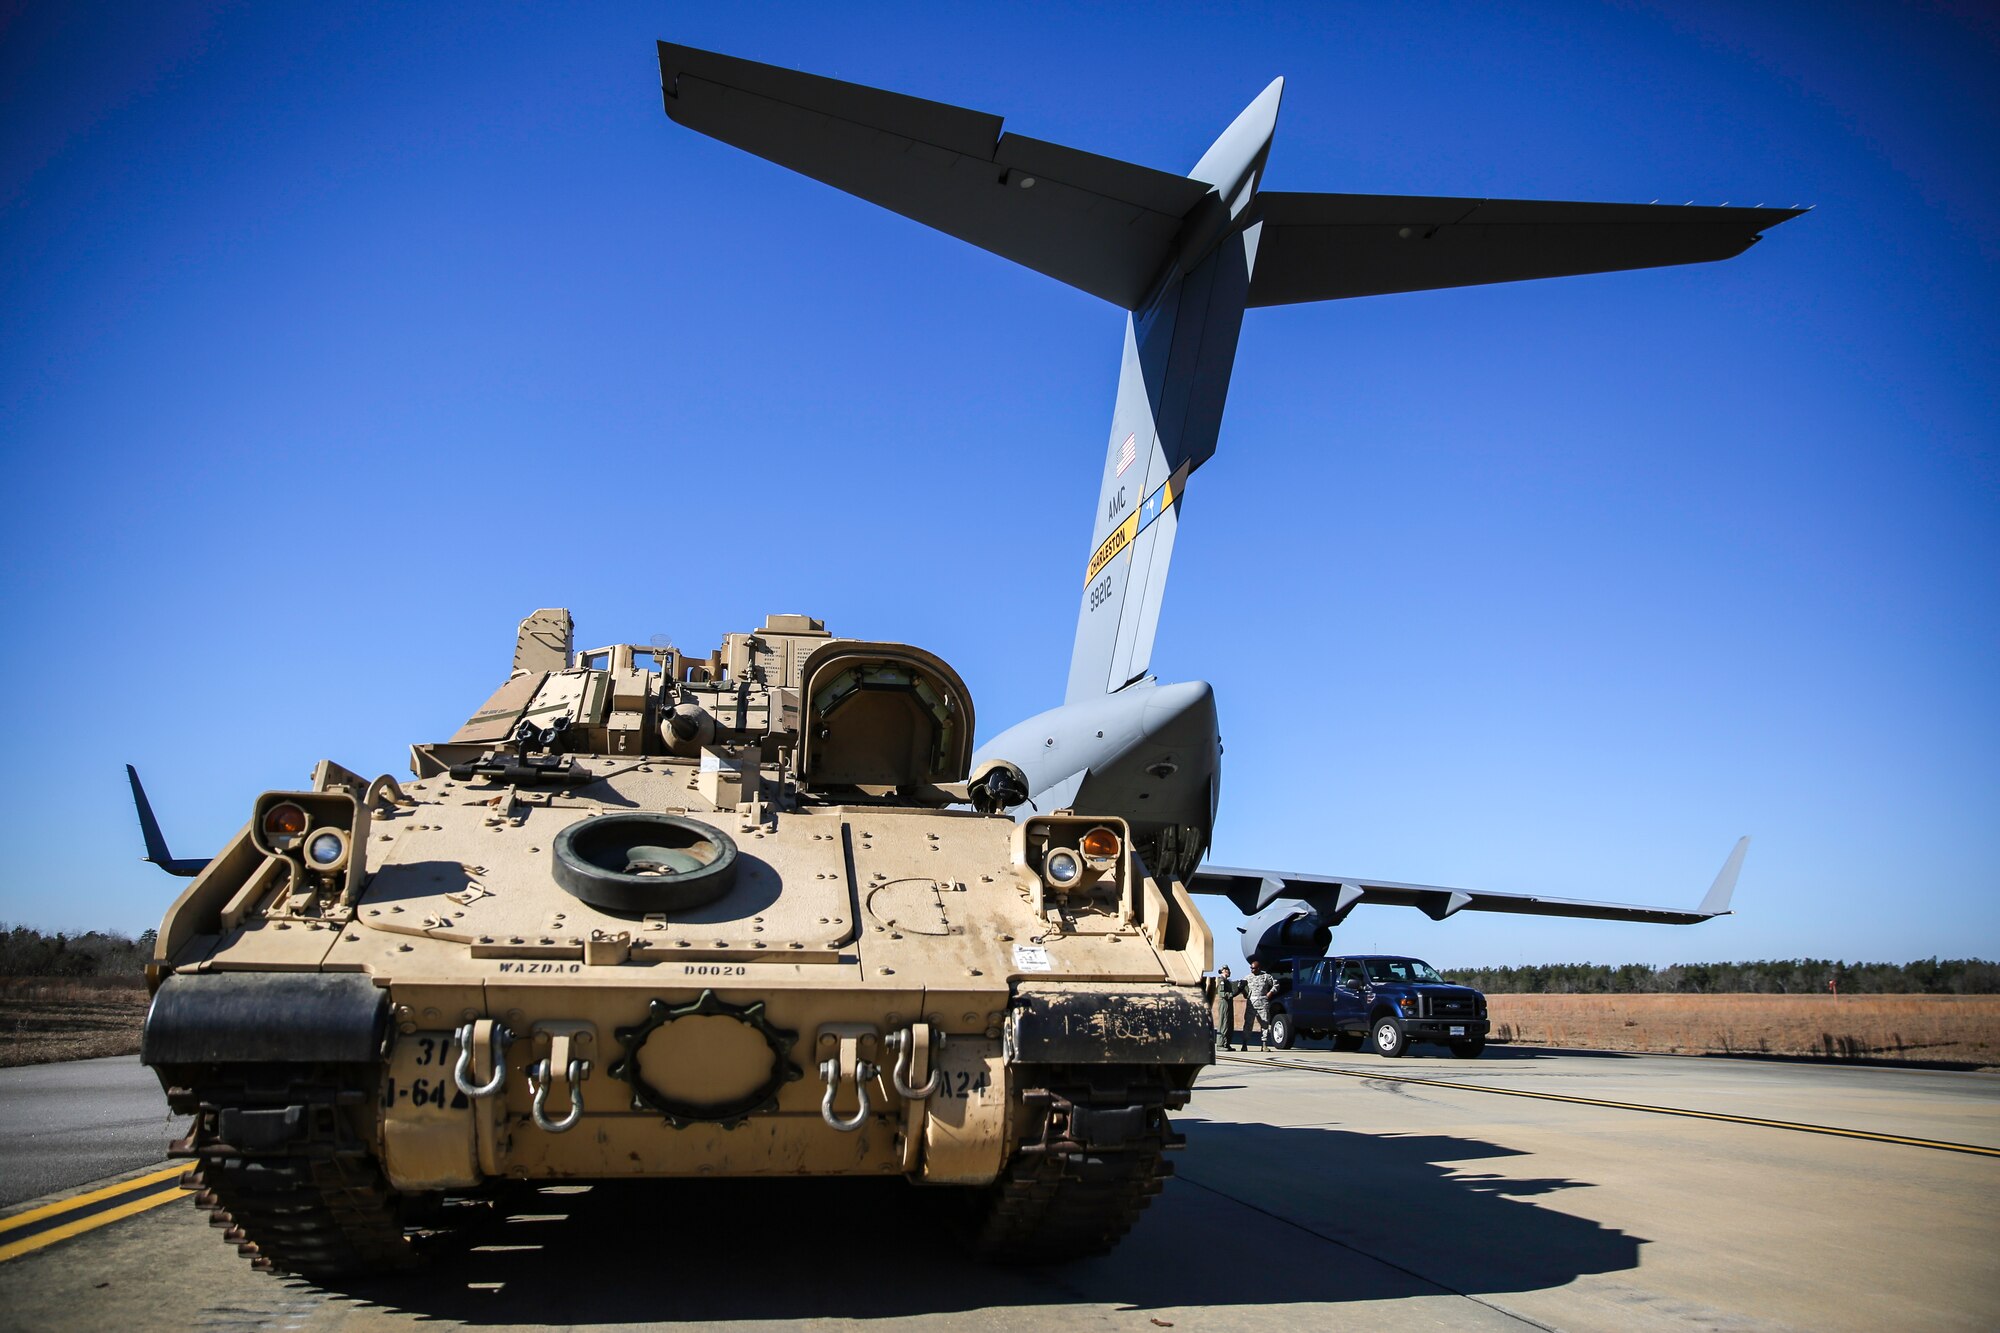 An M2A3 Bradley Fighting Vehicle sits on the ramp at North Air Force Auxiliary Field in North, S.C. Dec. 11, 2014. The vehicle was used as cargo during a two-day exercise which integrated C-17 air and ground crew training for 315th Airlift Wing Airmen stationed at Joint Base Charleston, S.C. as well as Soldiers from one of the 3rd Infantry Division’s Immediate Ready Companies stationed at Fort Stewart, Ga. Four C-17’s were used during the exercise to deploy and redeploy two Abrams M1A2 tanks, an M88 recovery vehicle and two M2A3 Bradley Fighting Vehicles. (U.S. Air Force photo by Tech. Sgt. Shane Ellis)